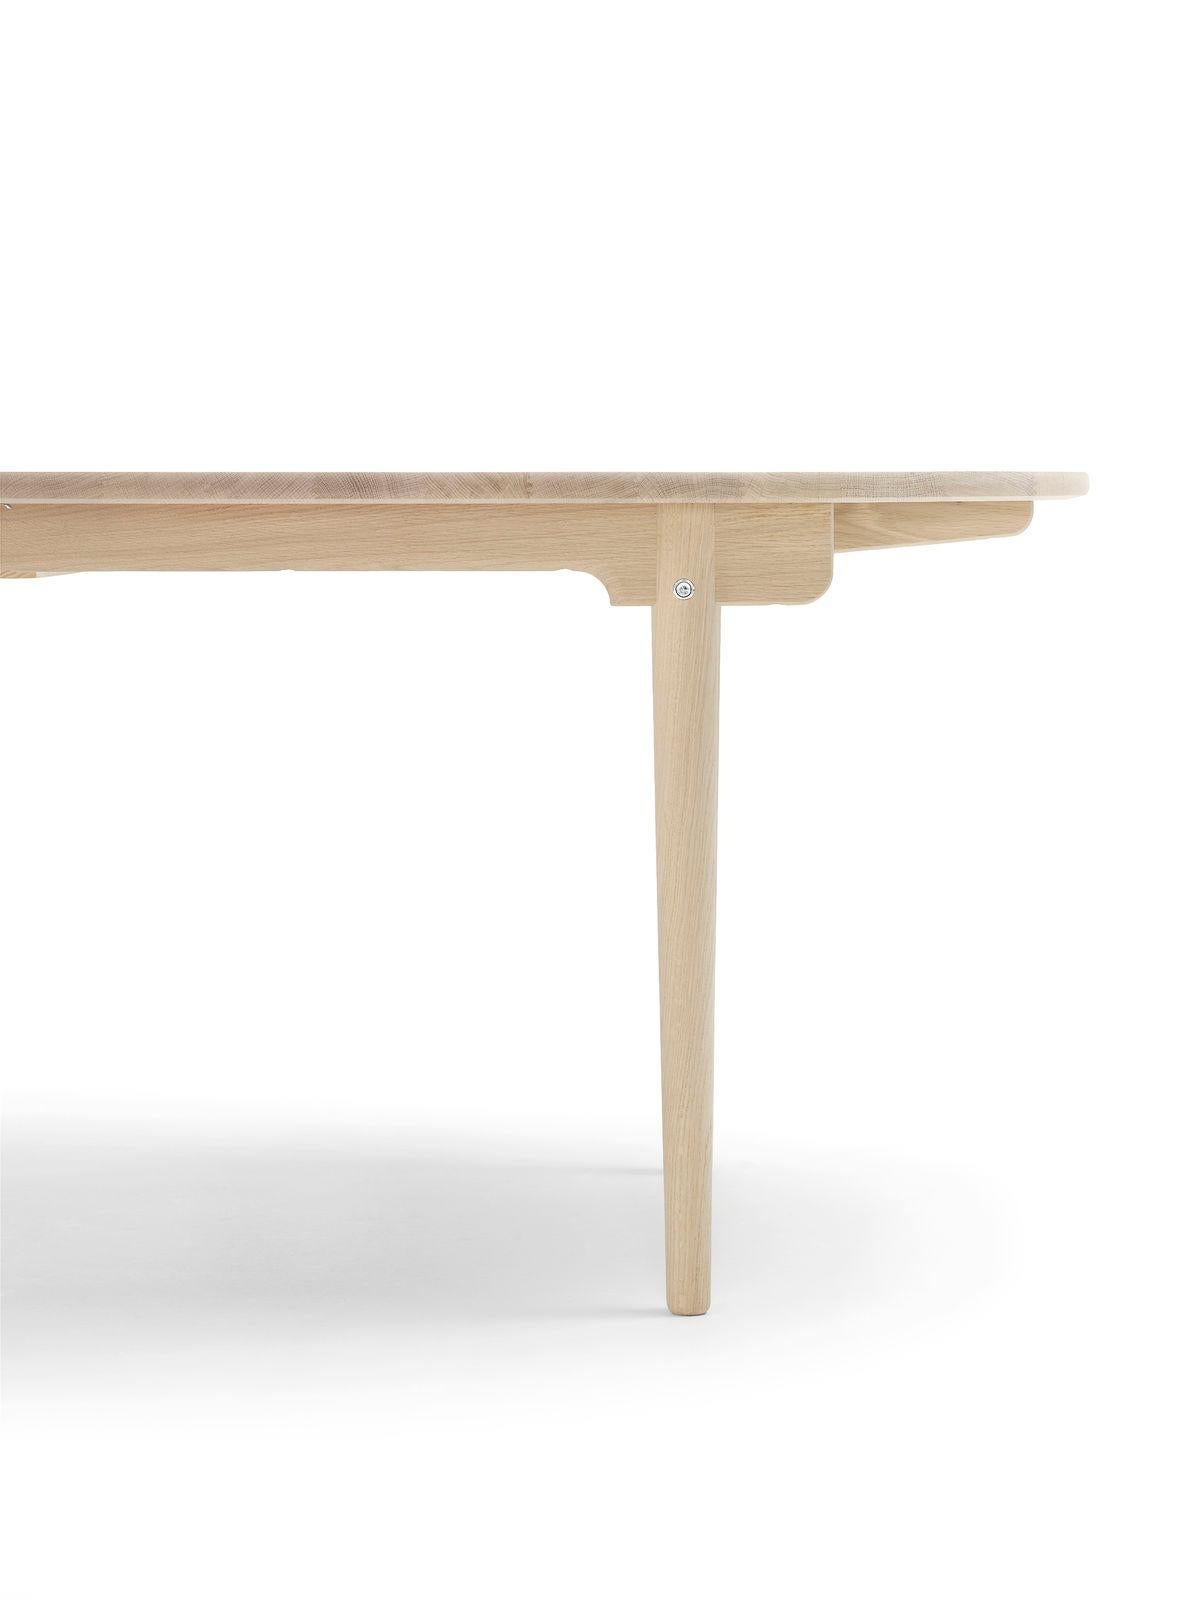 Mid-Century Modern CH338 Dining Table with Oak White Oil Finish (Leaf Inserts Sold Separately) For Sale